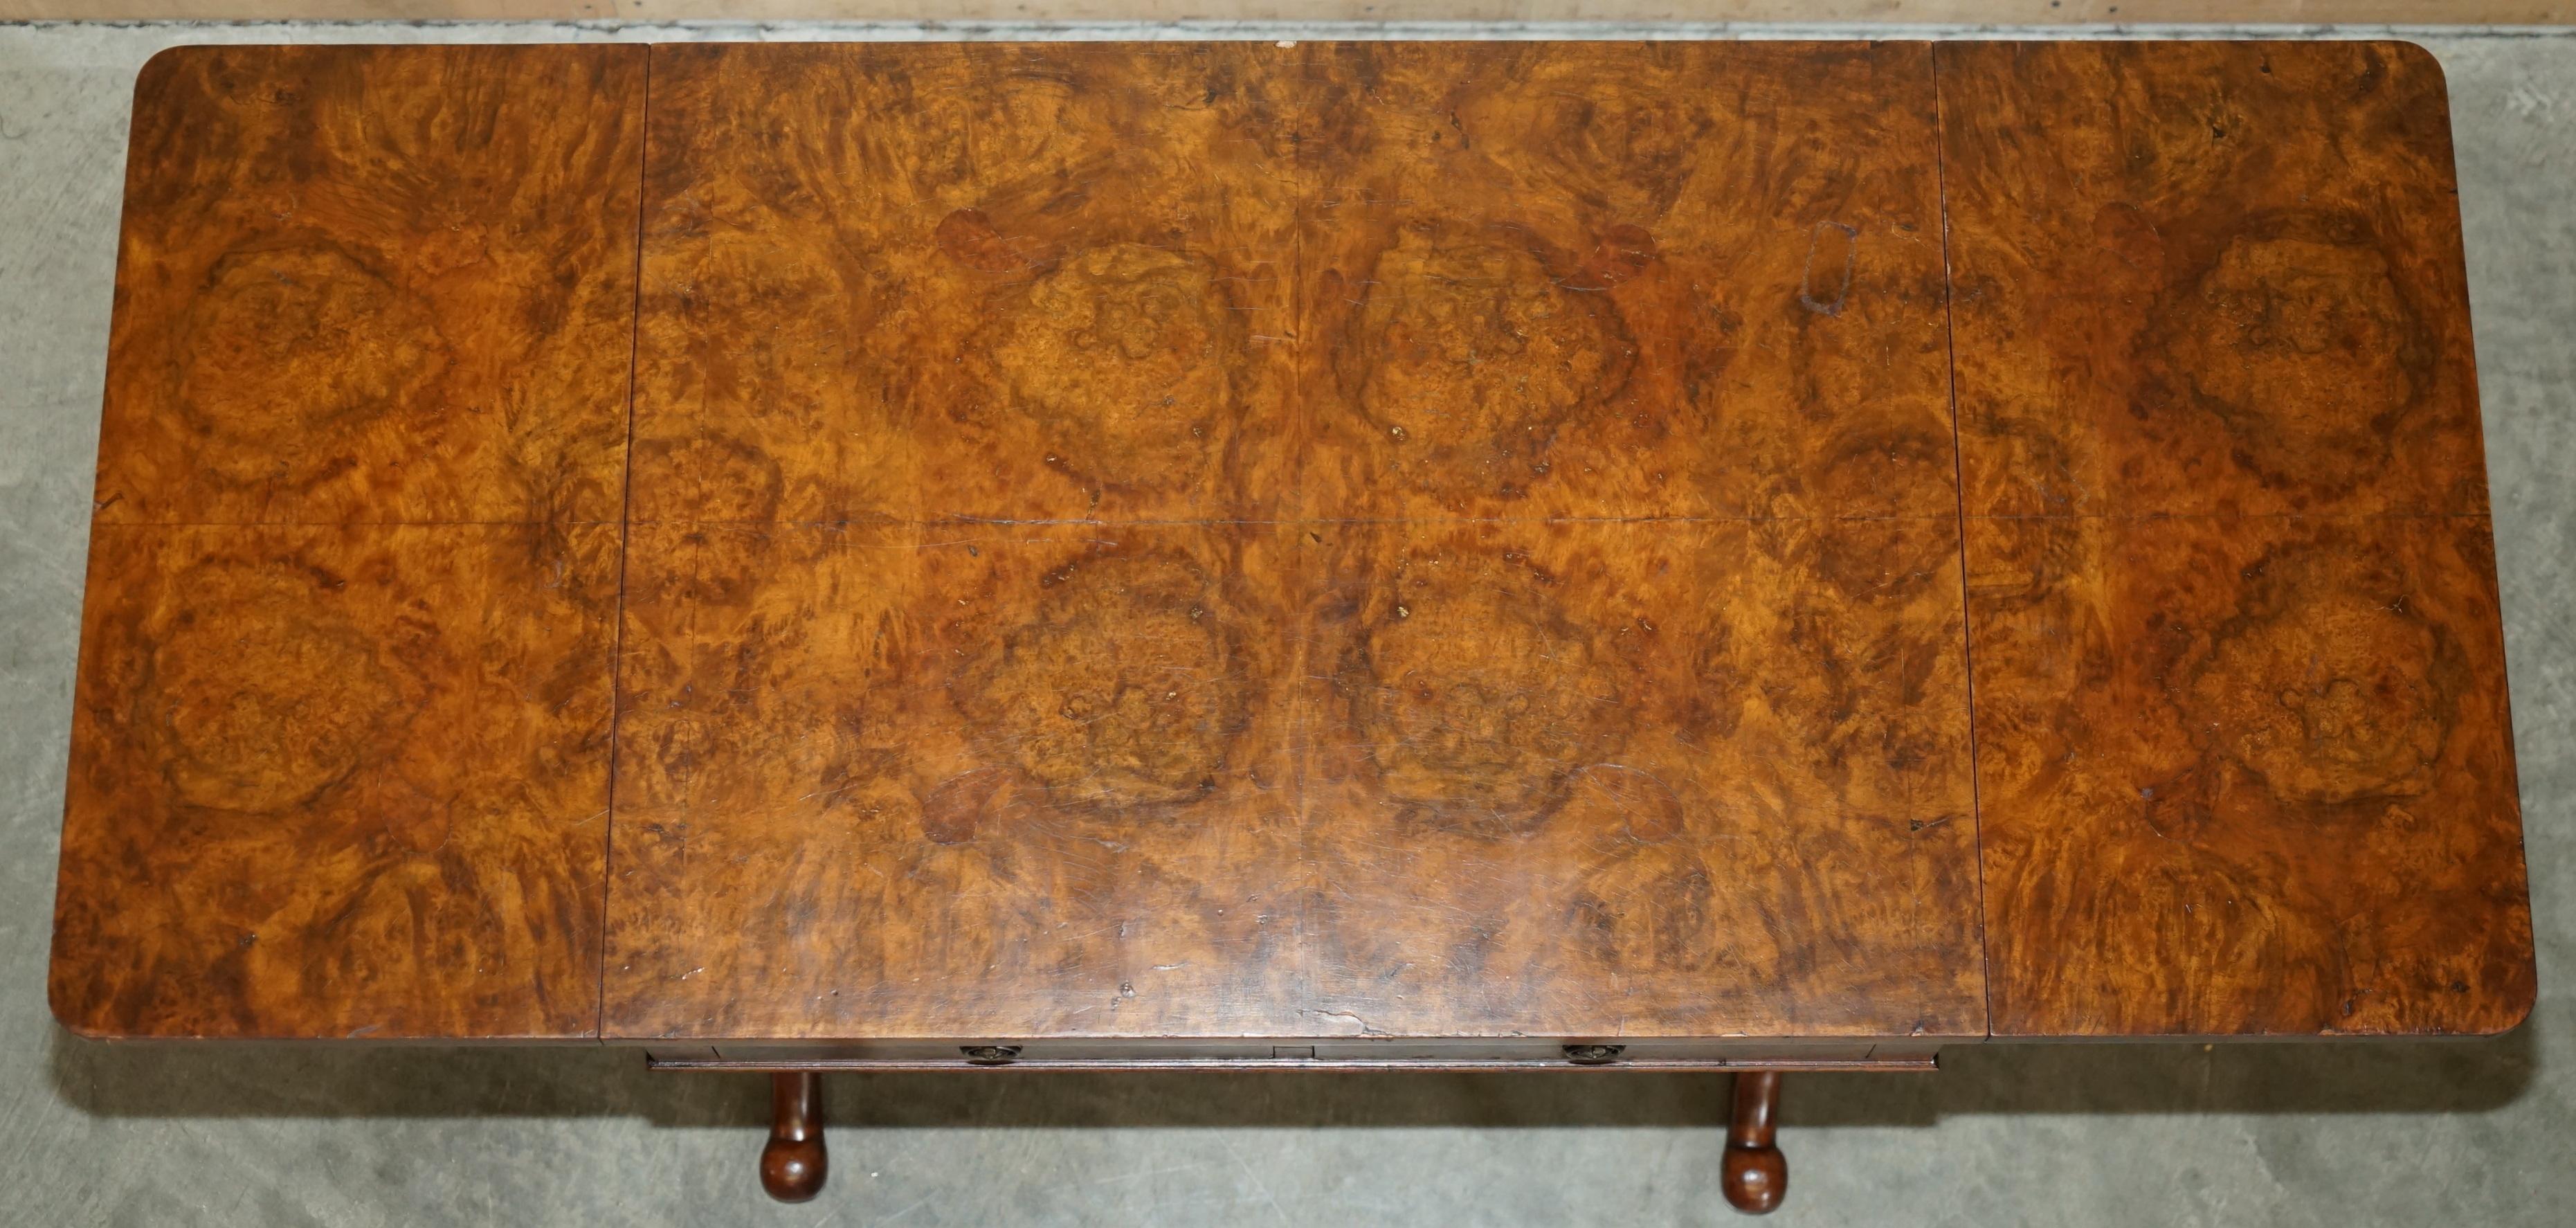 ANTIQUE CIRCA 1880 EXTRA LARGE BURR WALNUT EXTENDING SOFA TABLE STUNNING PATiNA For Sale 9